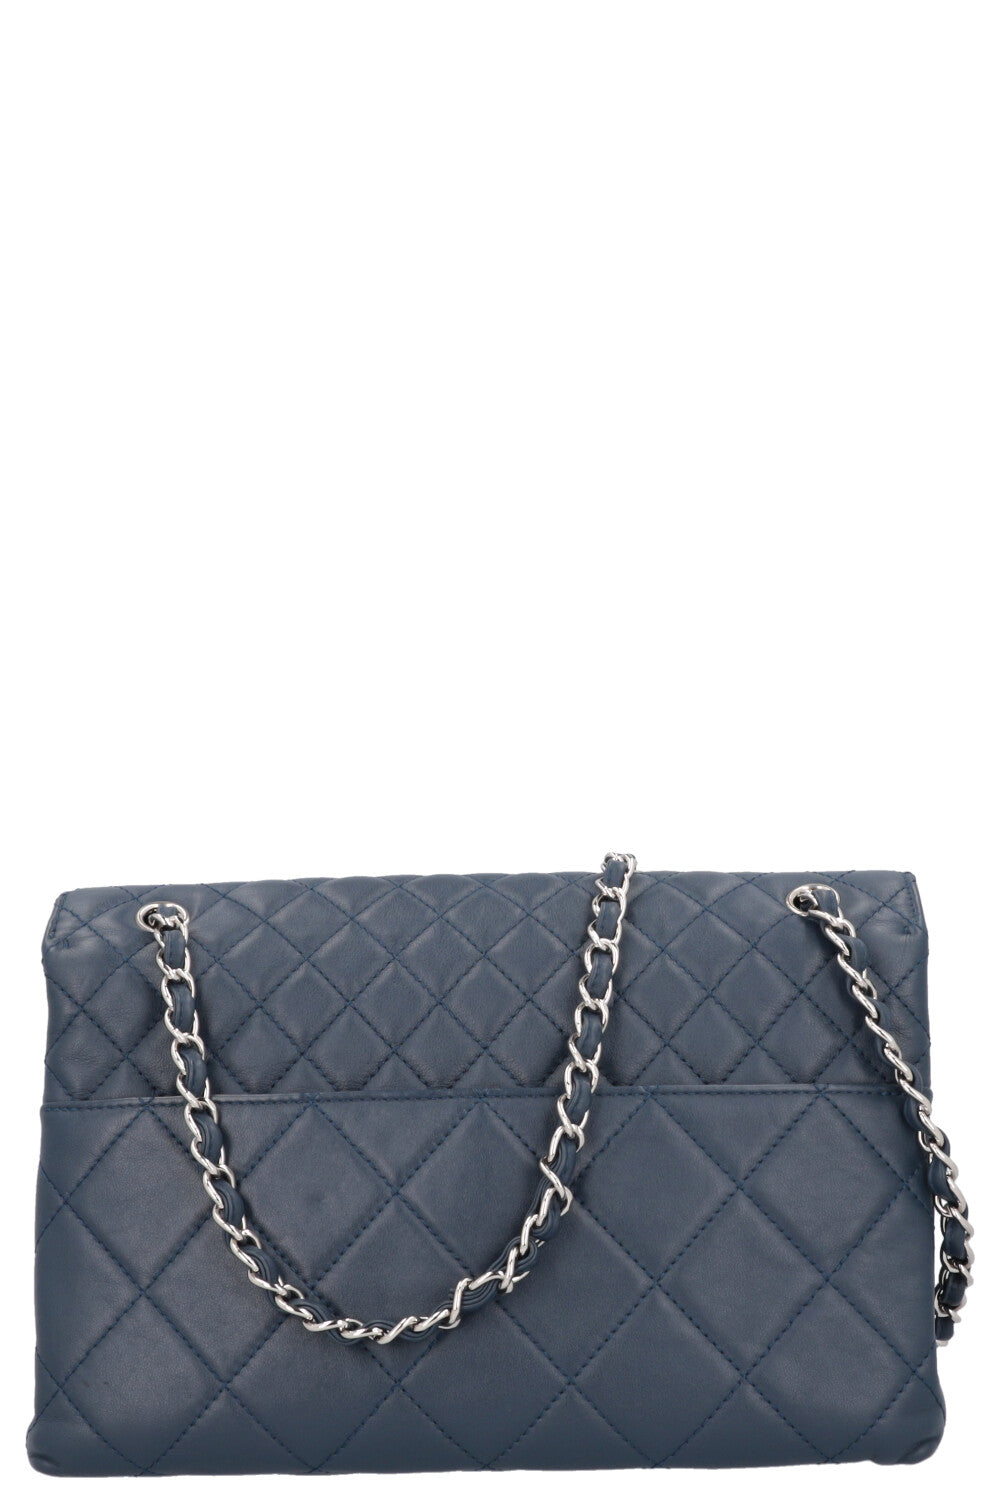 CHANEL In The Business Flap Bag